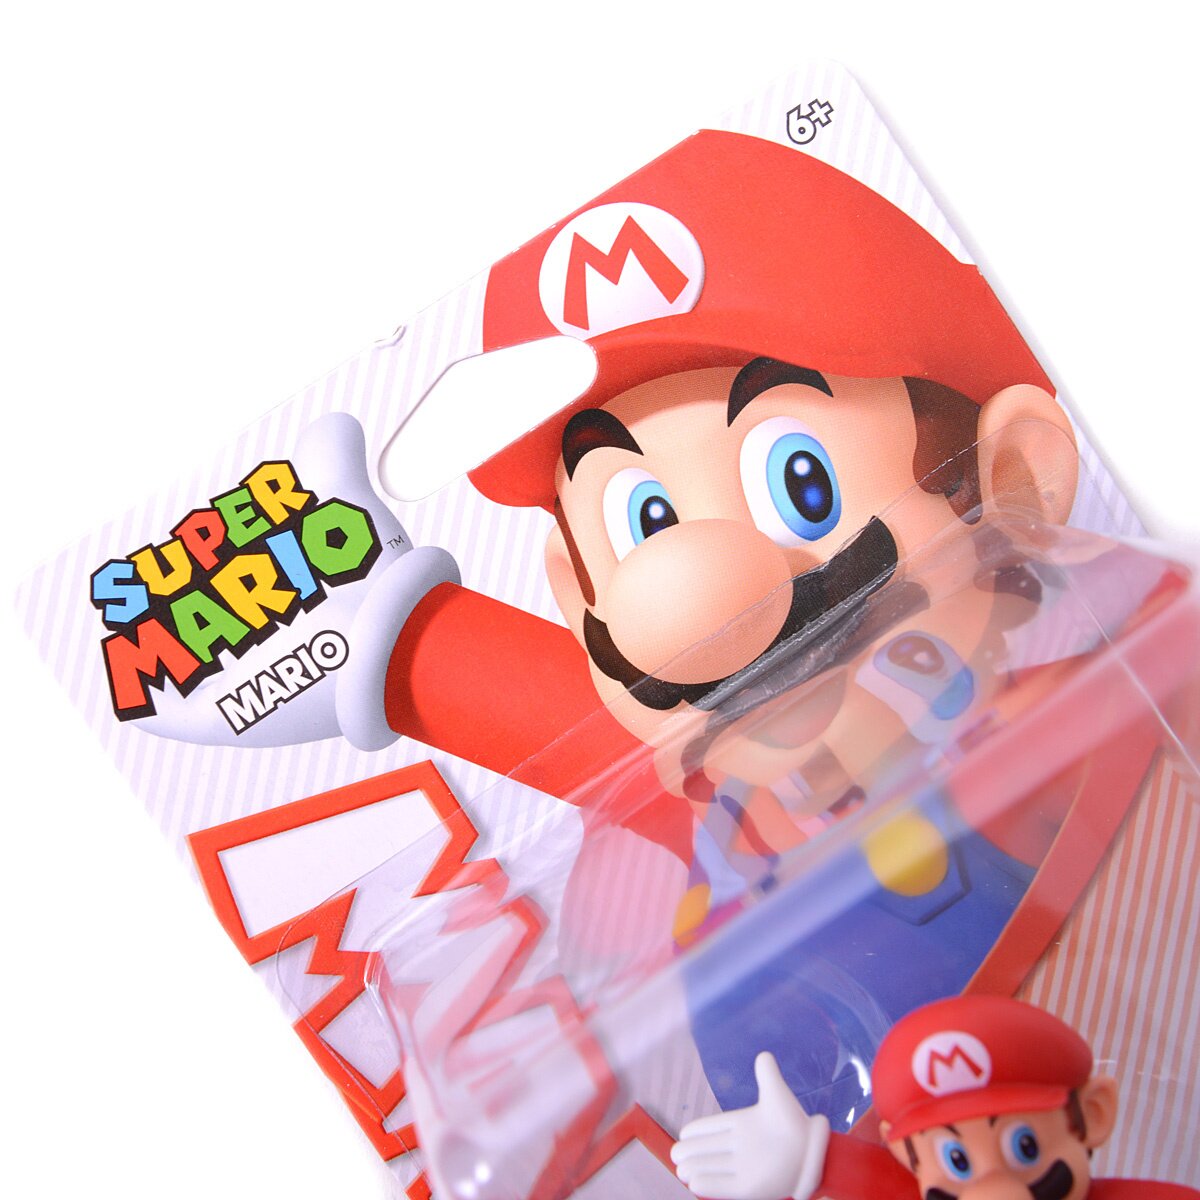 Mario amiibo - THIS PRODUCT IS NOT A TOY